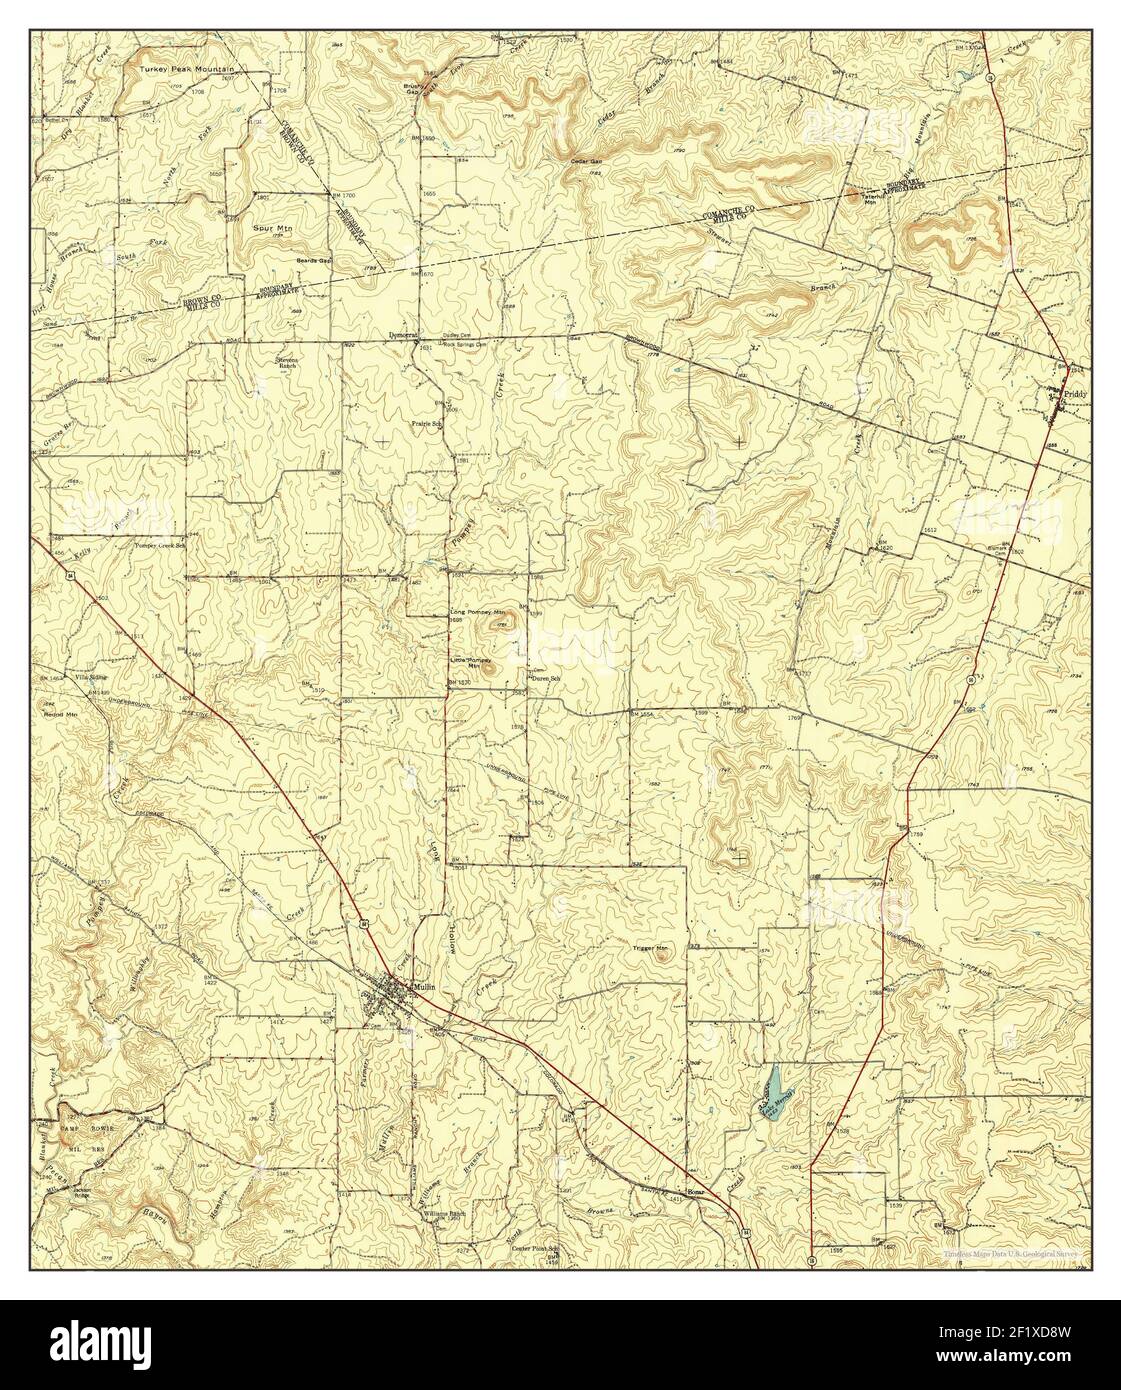 Mullin, Texas, map 1950, 1:62500, United States of America by Timeless Maps, data U.S. Geological Survey Stock Photo